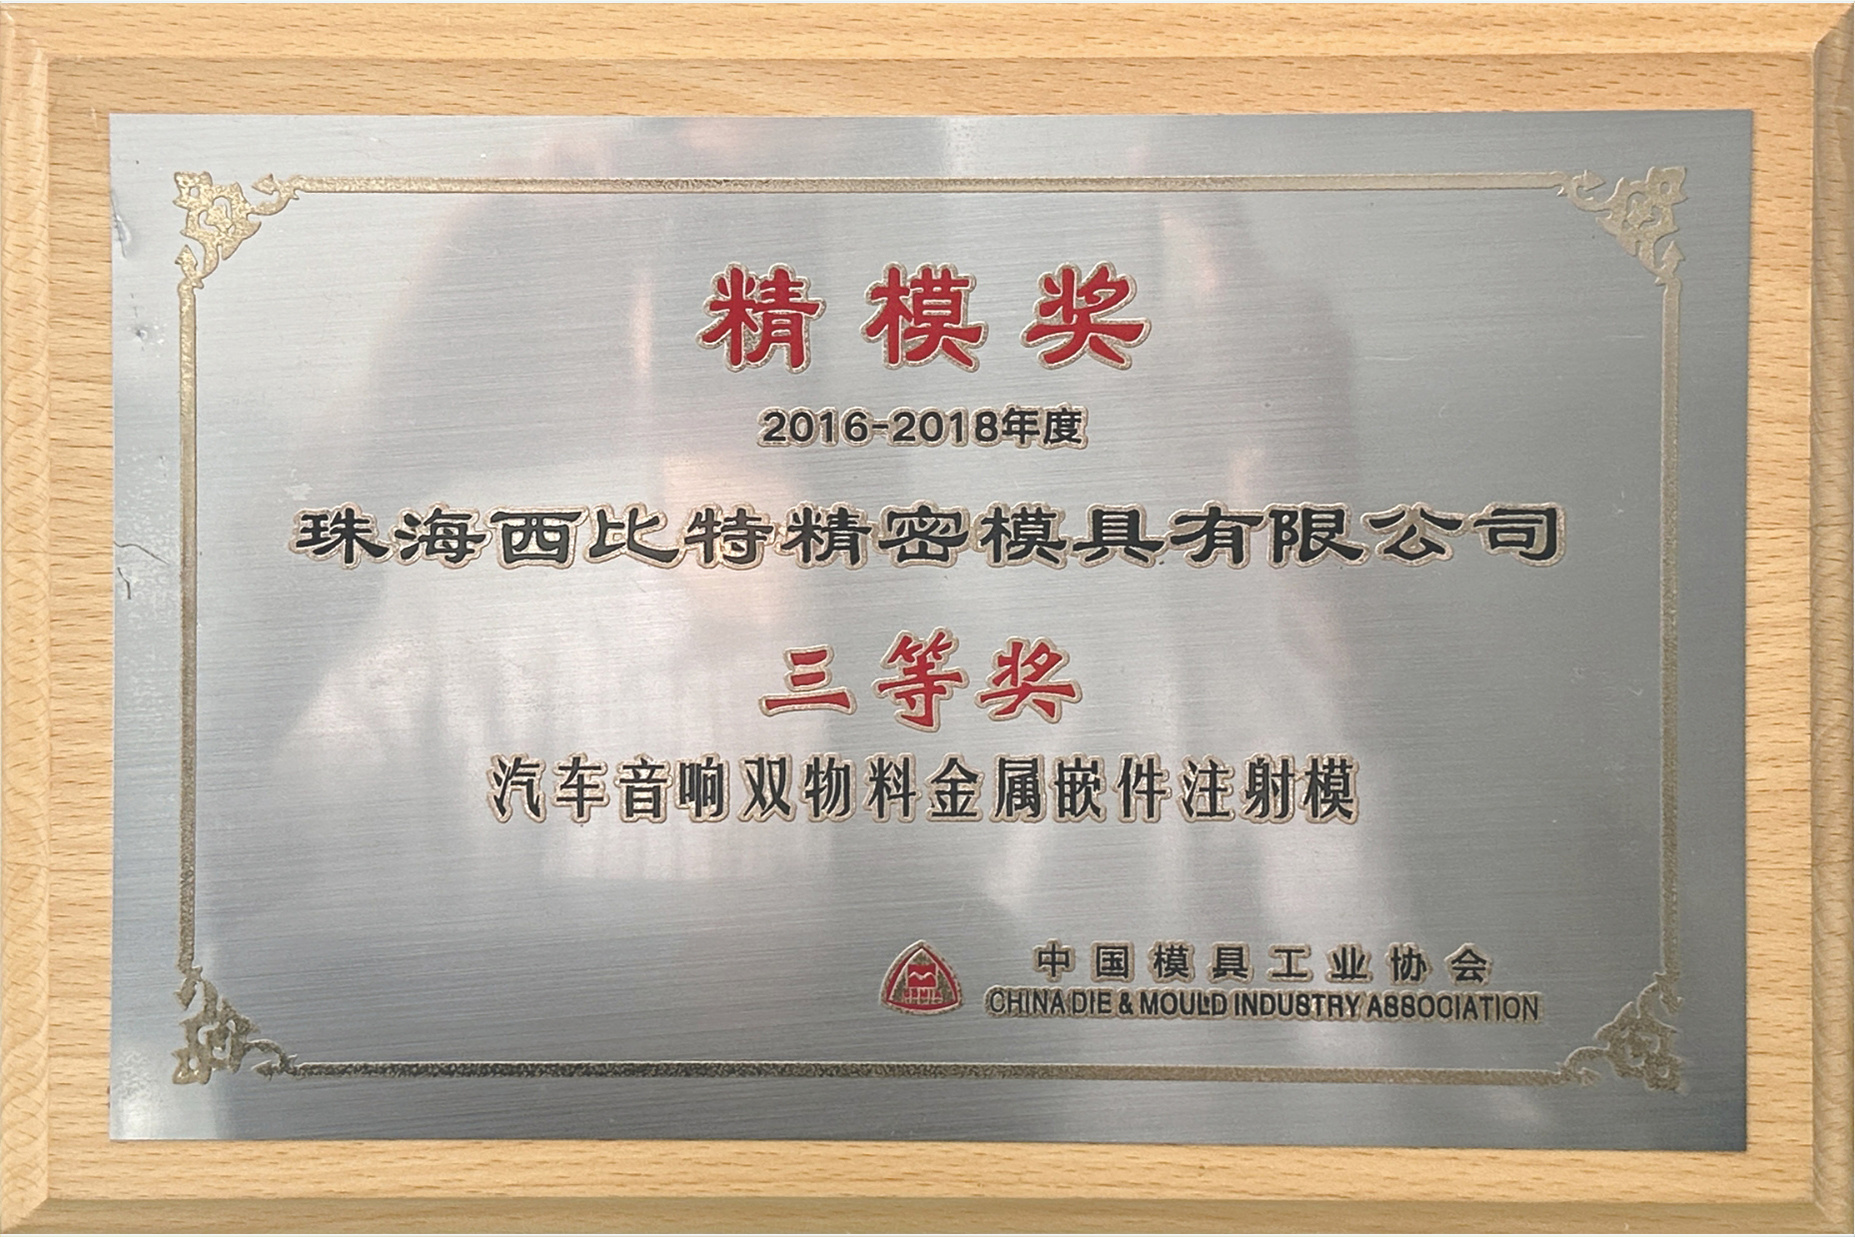 China Mold Industry Association Precision Mold Third Prize